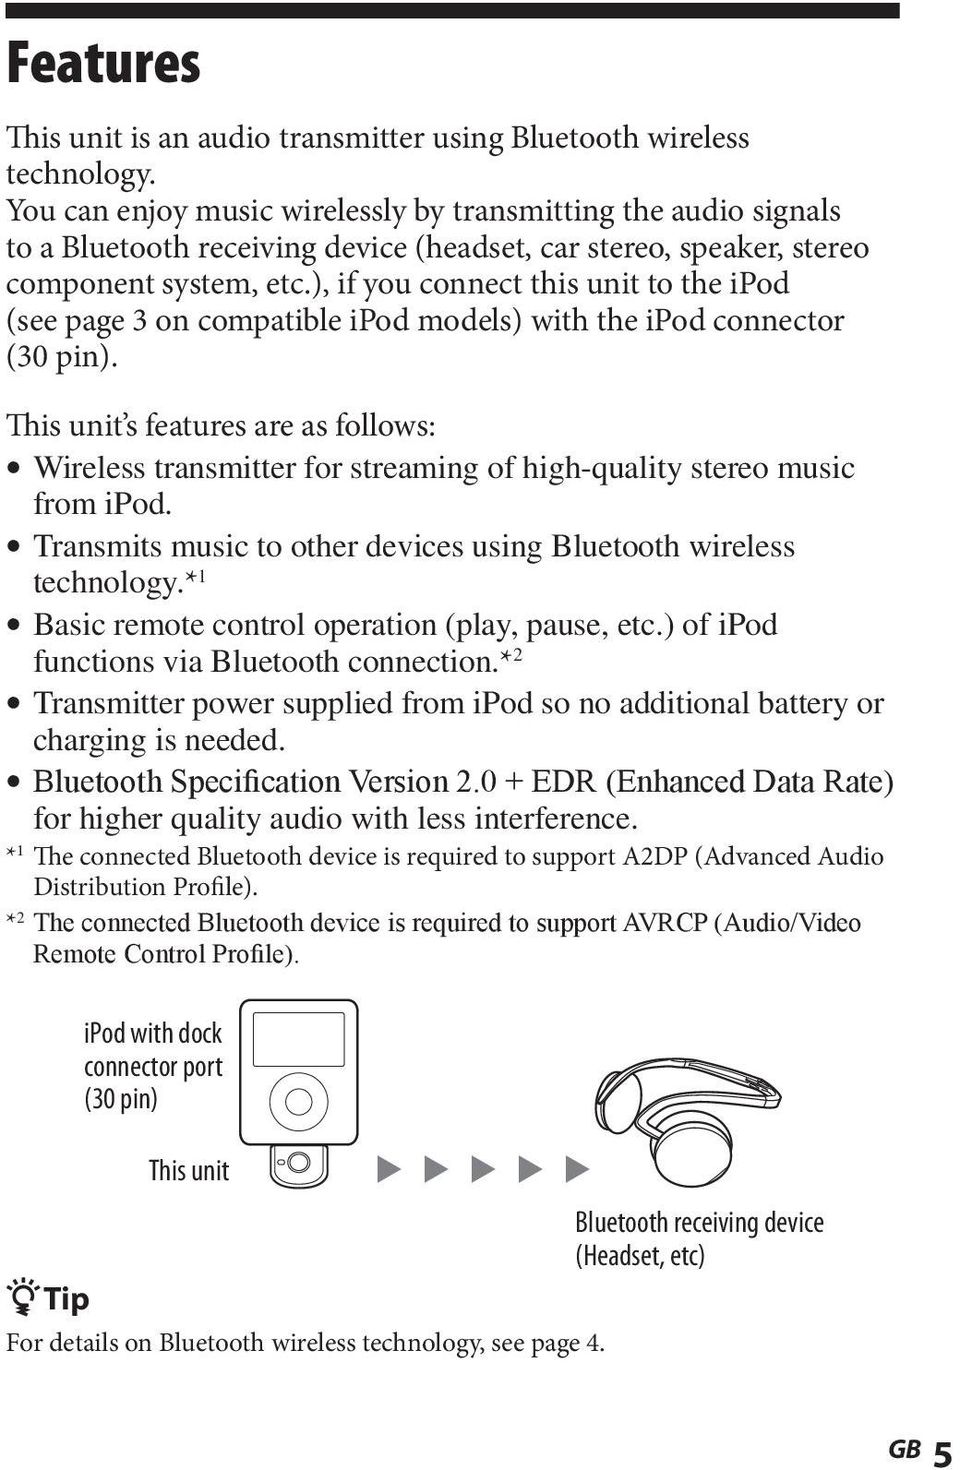 ), if you connect this unit to the ipod (see page 3 on compatible ipod models) with the ipod connector (30 pin).